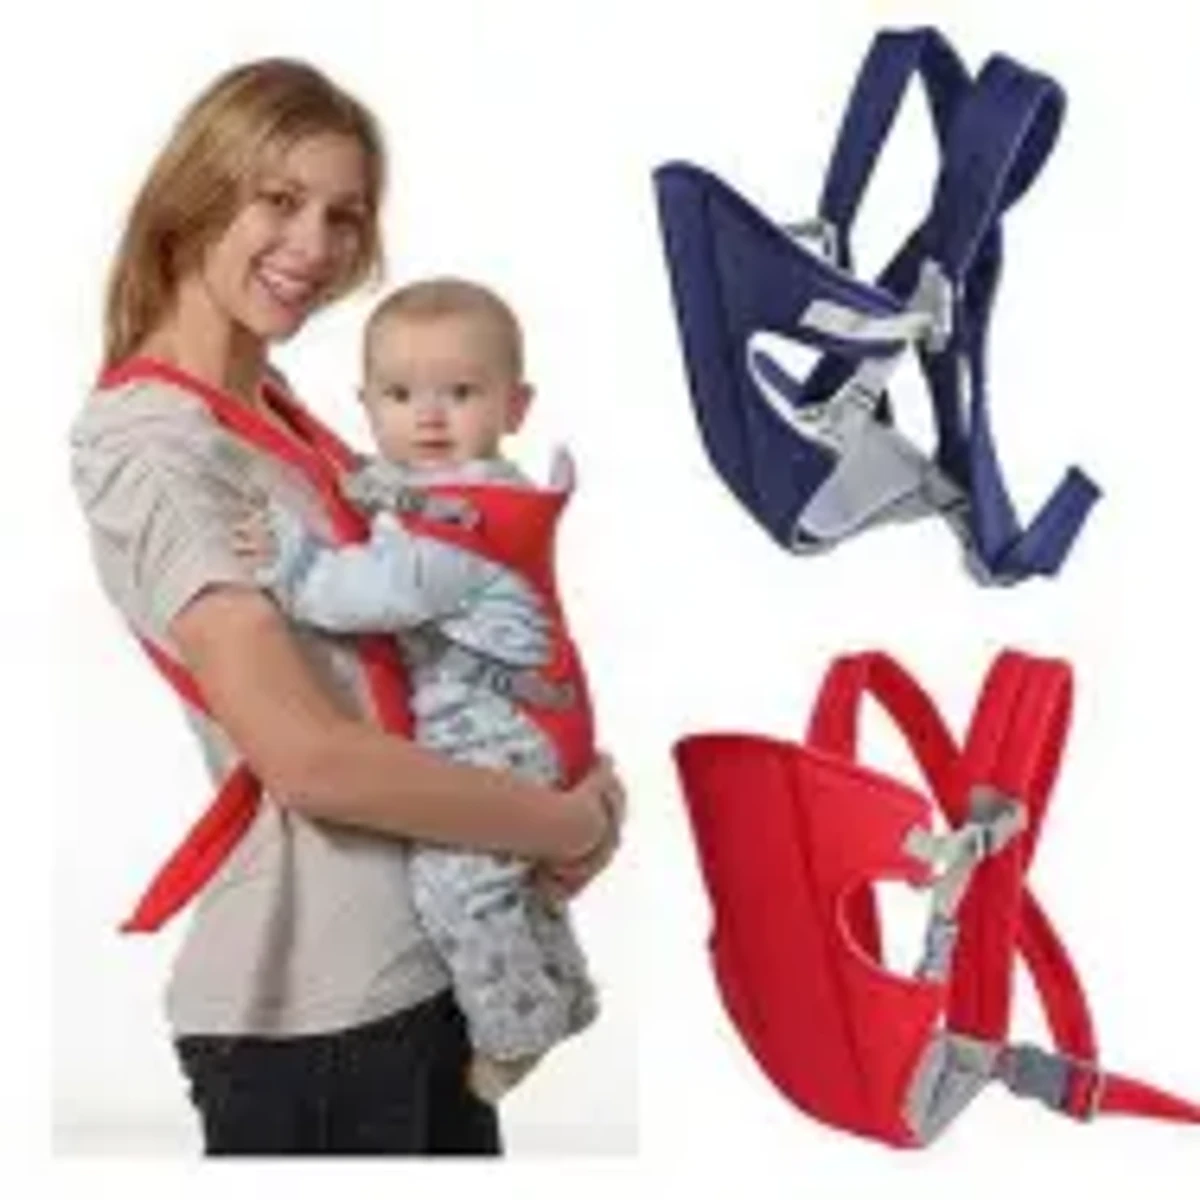 Baby Carrier Comfort Wrap Bag - Red